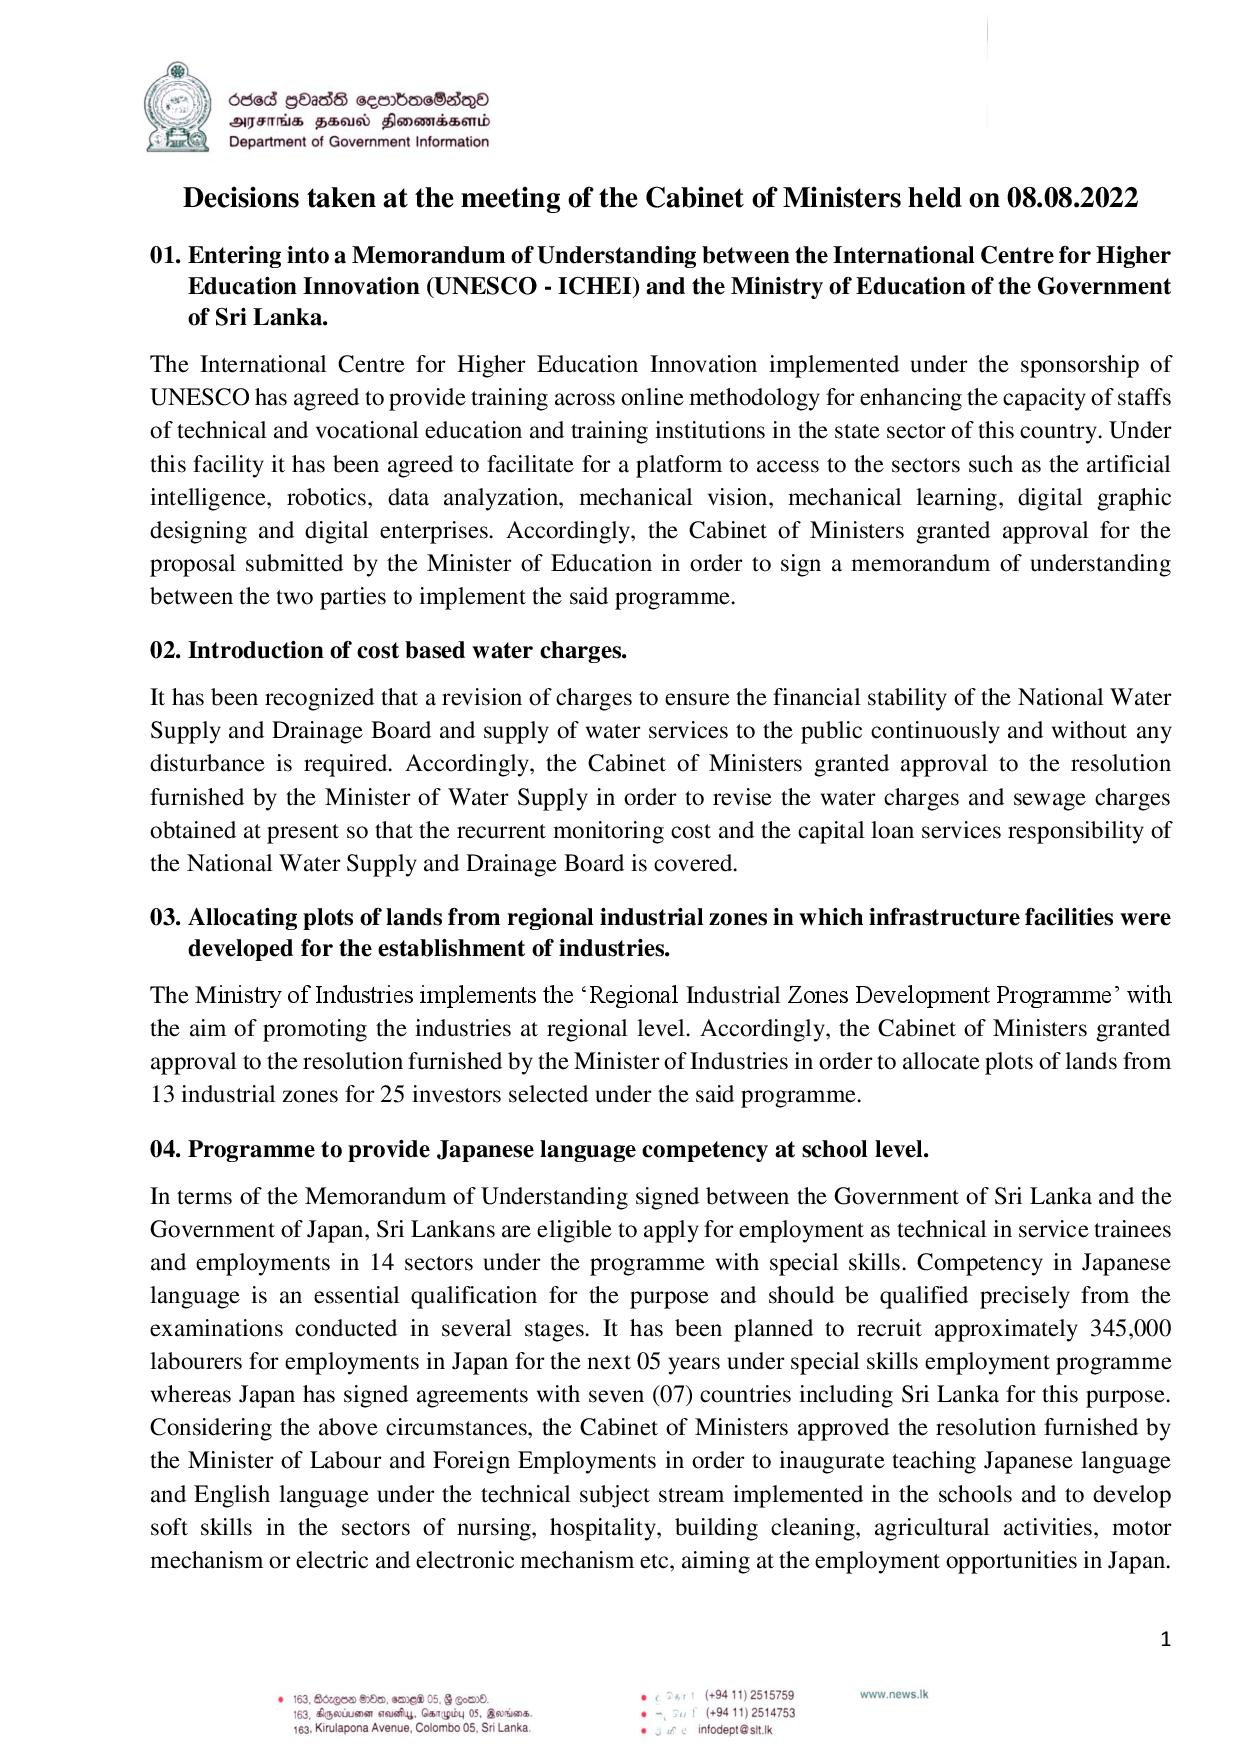 Cabinet Decisions on 08.08.2022 E page 001